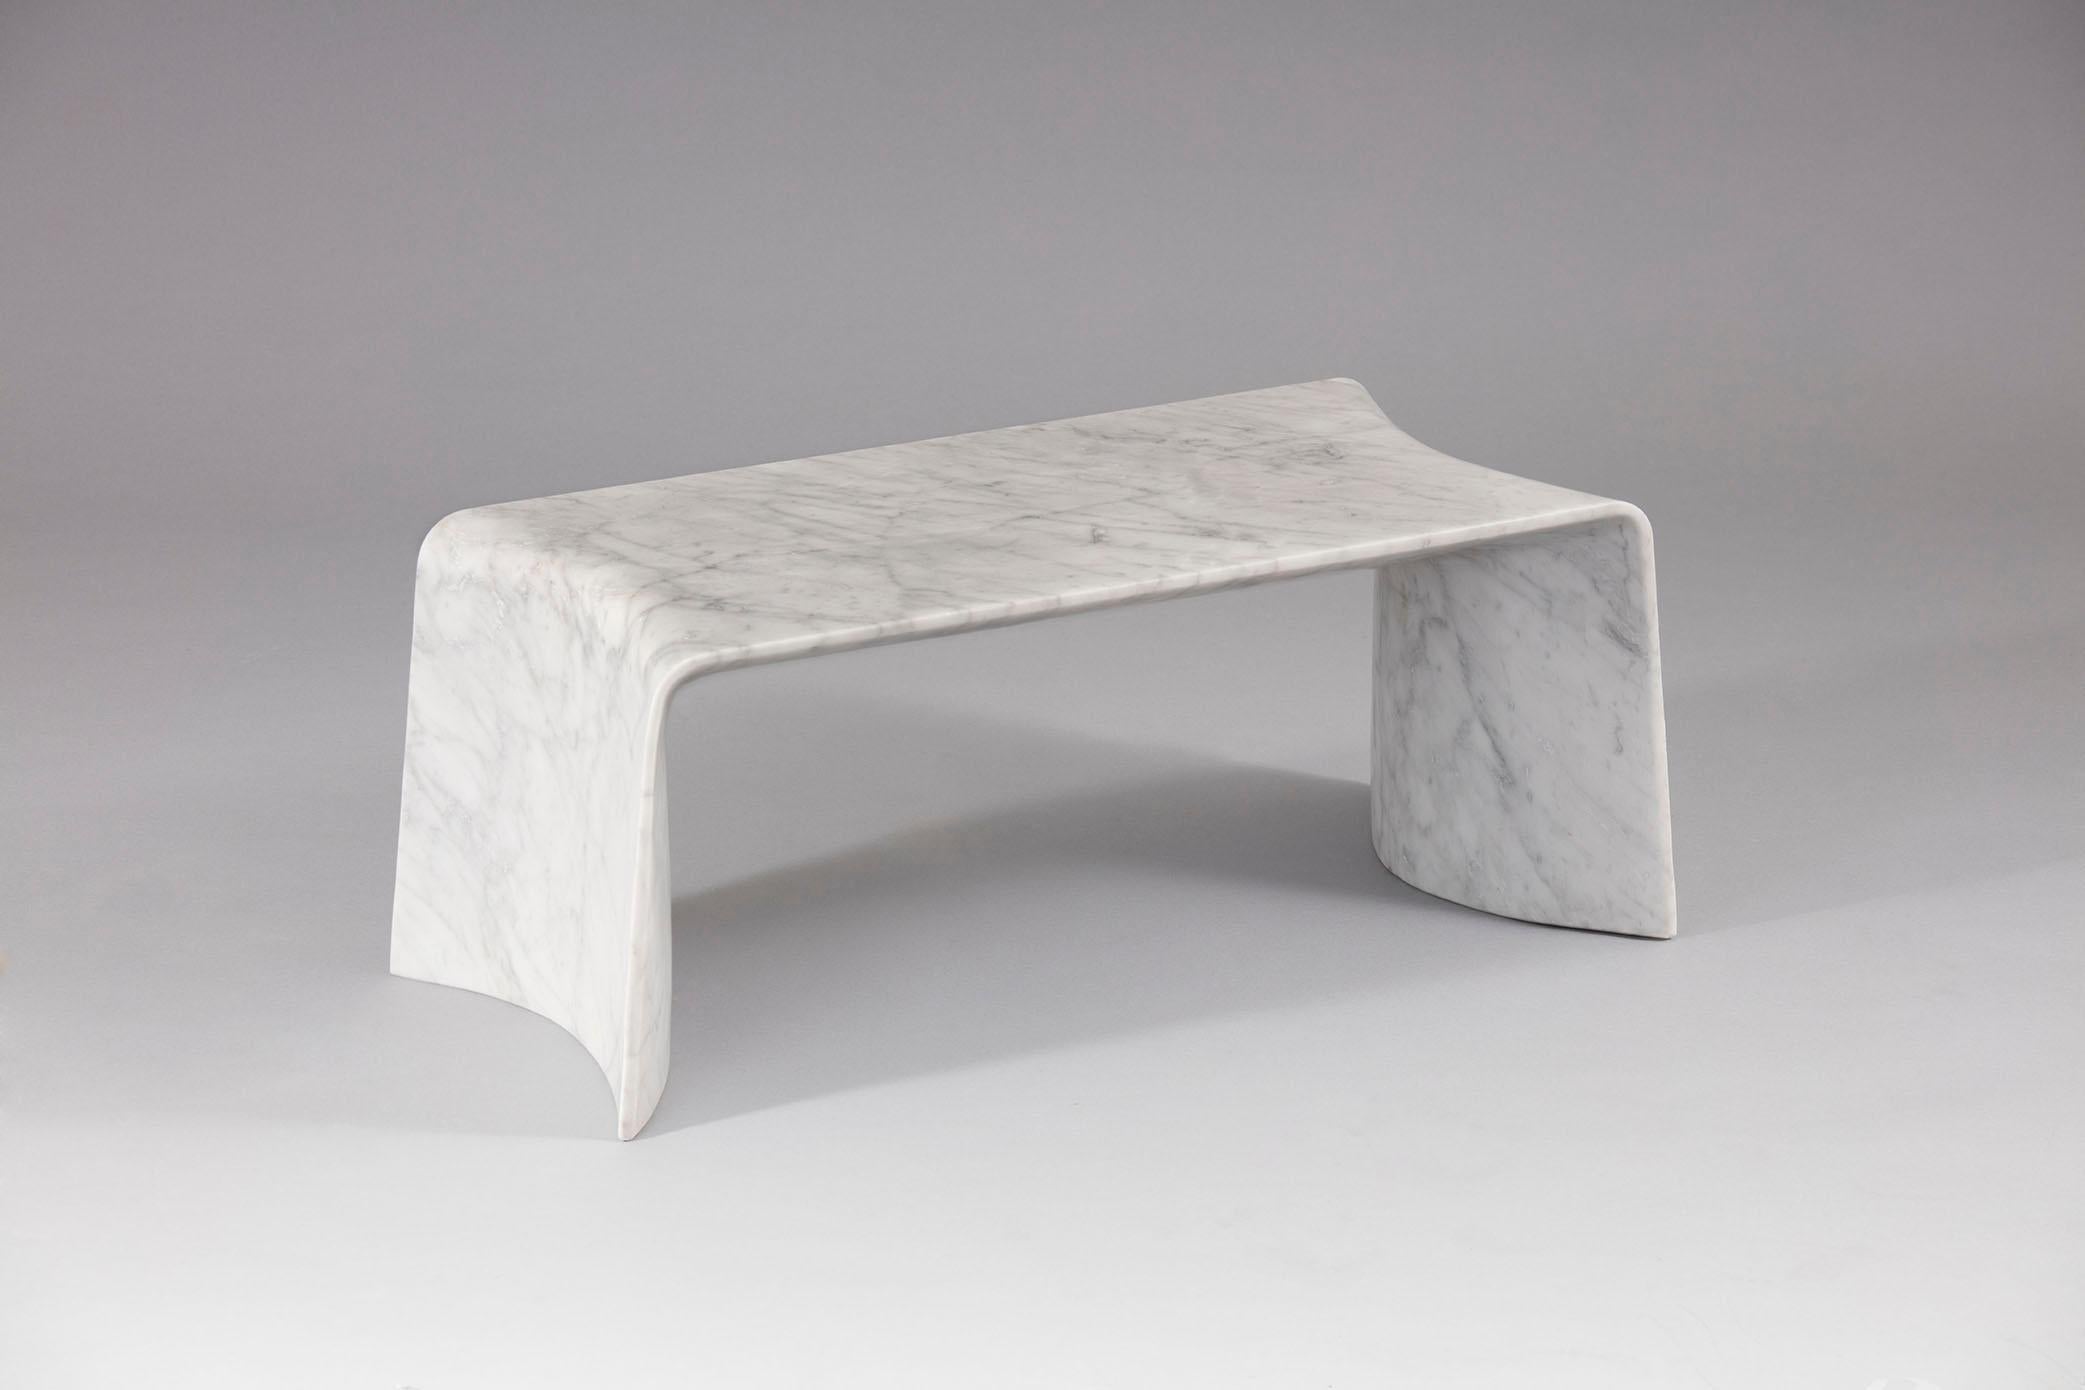 Marble is commonly perceived as heavy and inflexible
Folio turns this notion of marble on it’s head - cut from a solid block yet thin as paper.
Slim 10mm silhouette running along the edge of this dynamic table.

Design by Daniel Fintzi

FORMAR -